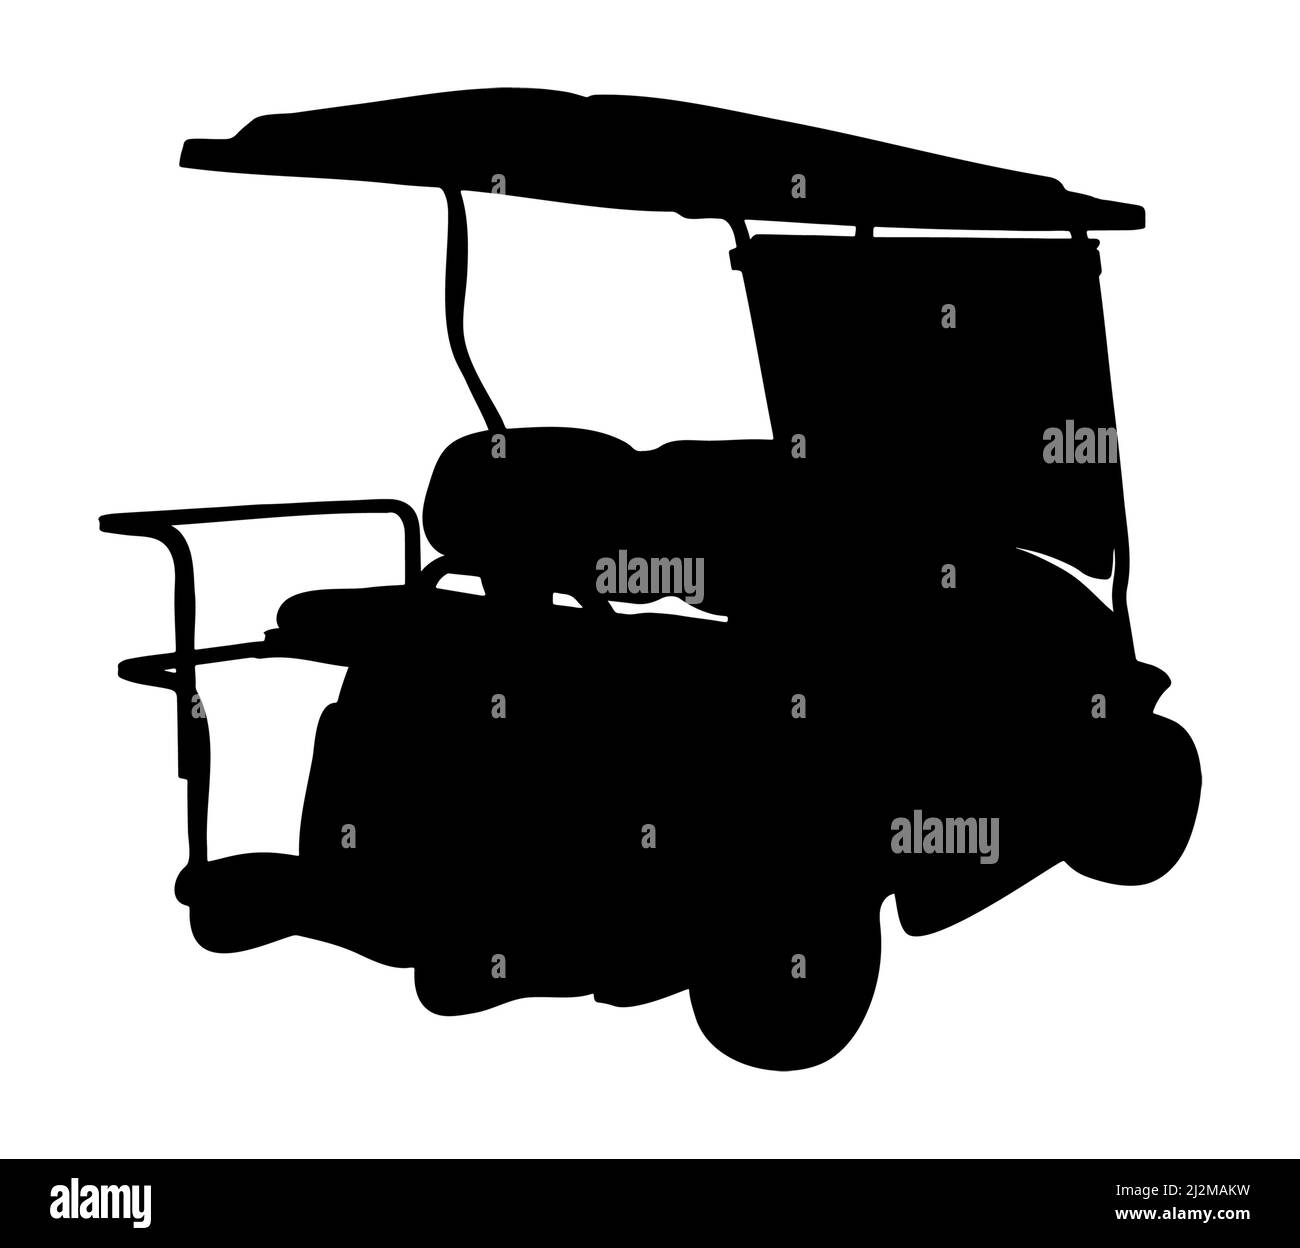 Golf cart silhouette illustration for golfing, golfers and sports topics on a white background. Stock Photo